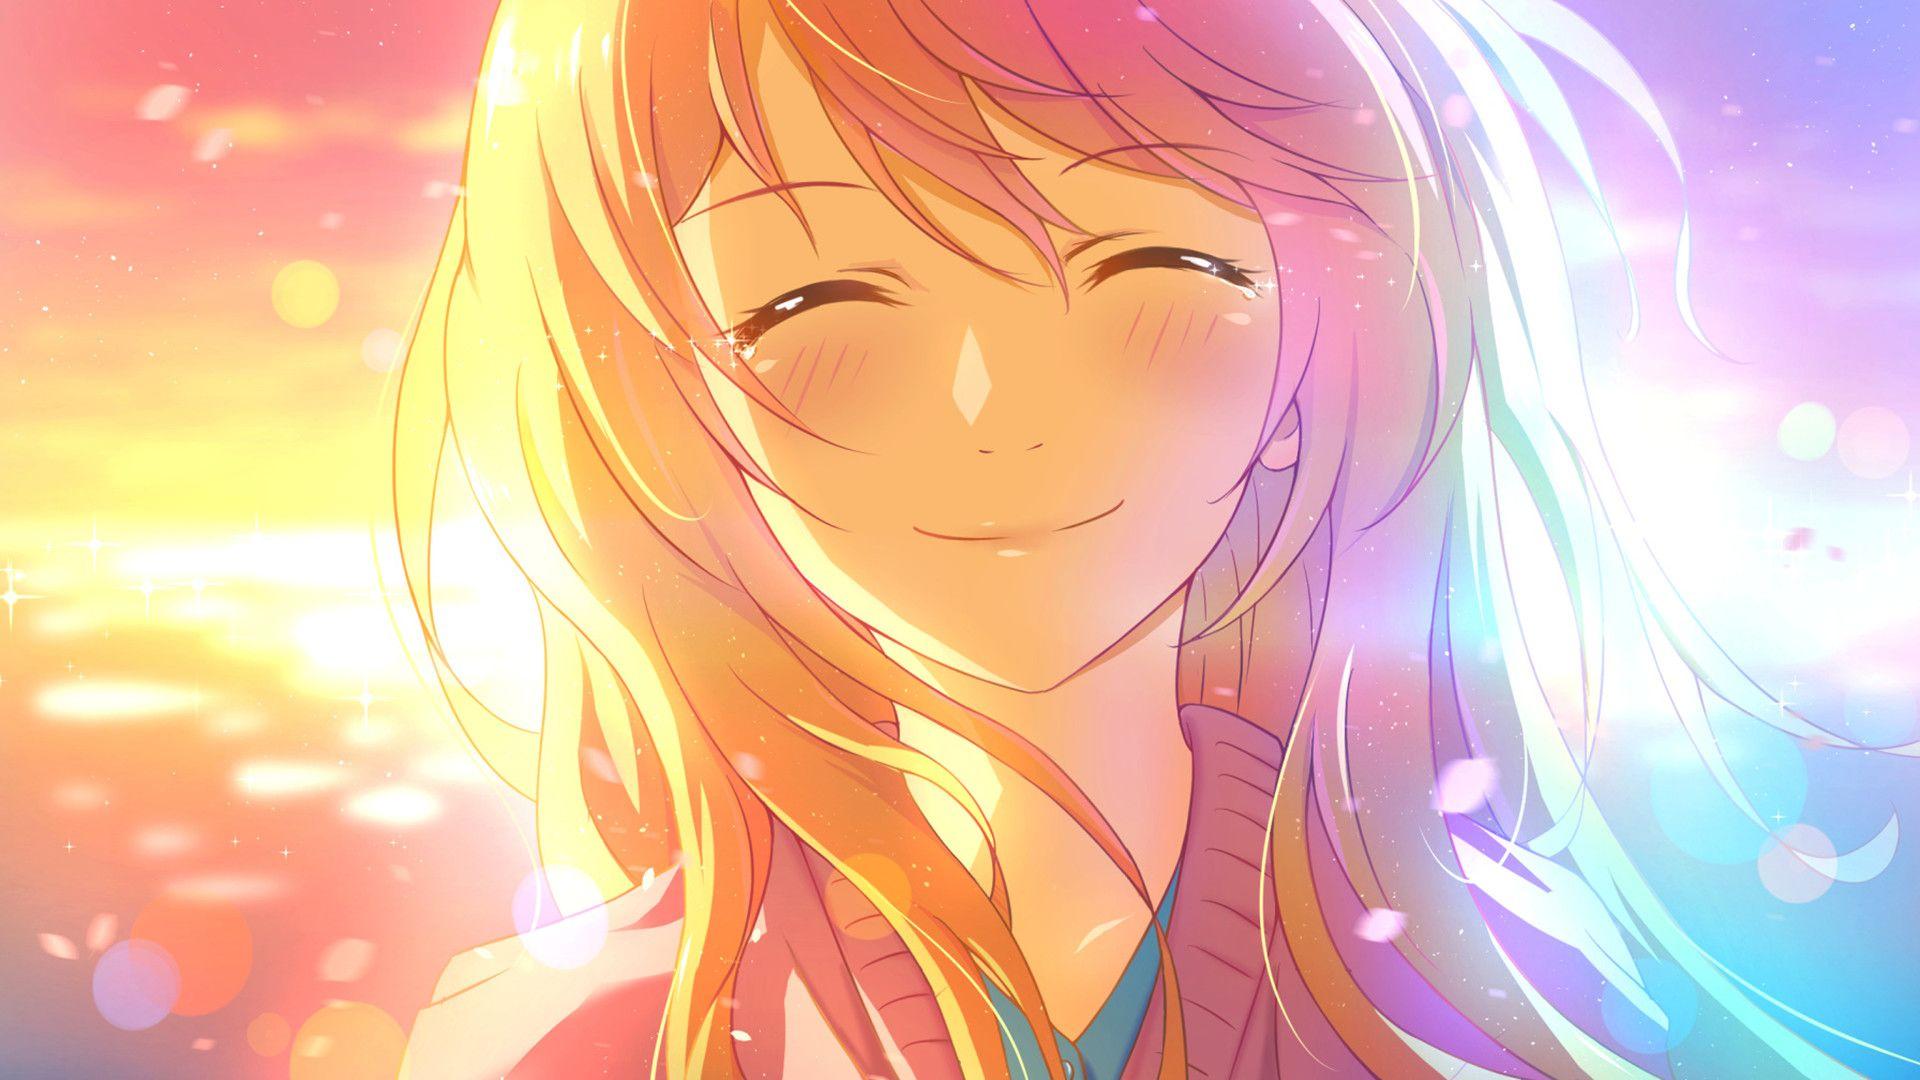 960+ Anime Your Lie in April HD Wallpapers and Backgrounds